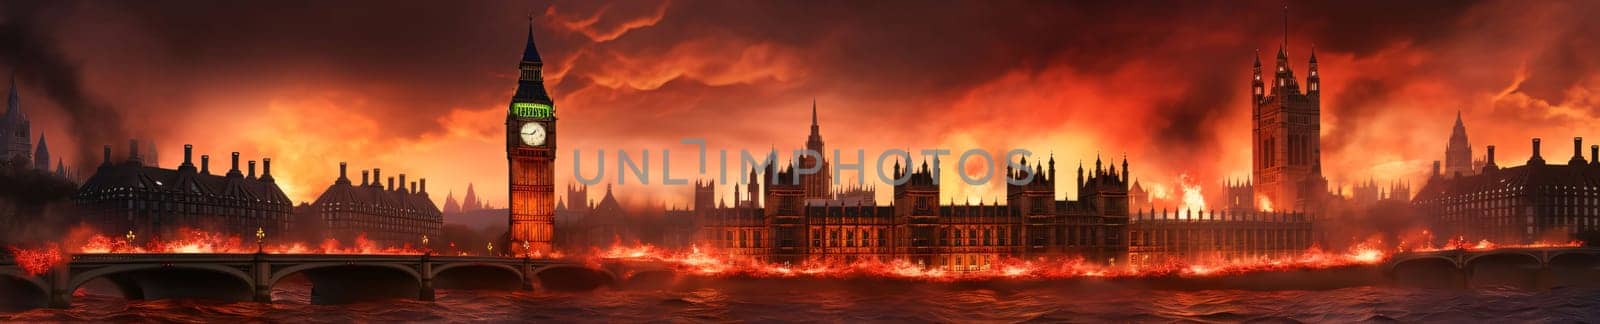 Banner: Big Ben and Houses of Parliament in London at sunset, United Kingdom